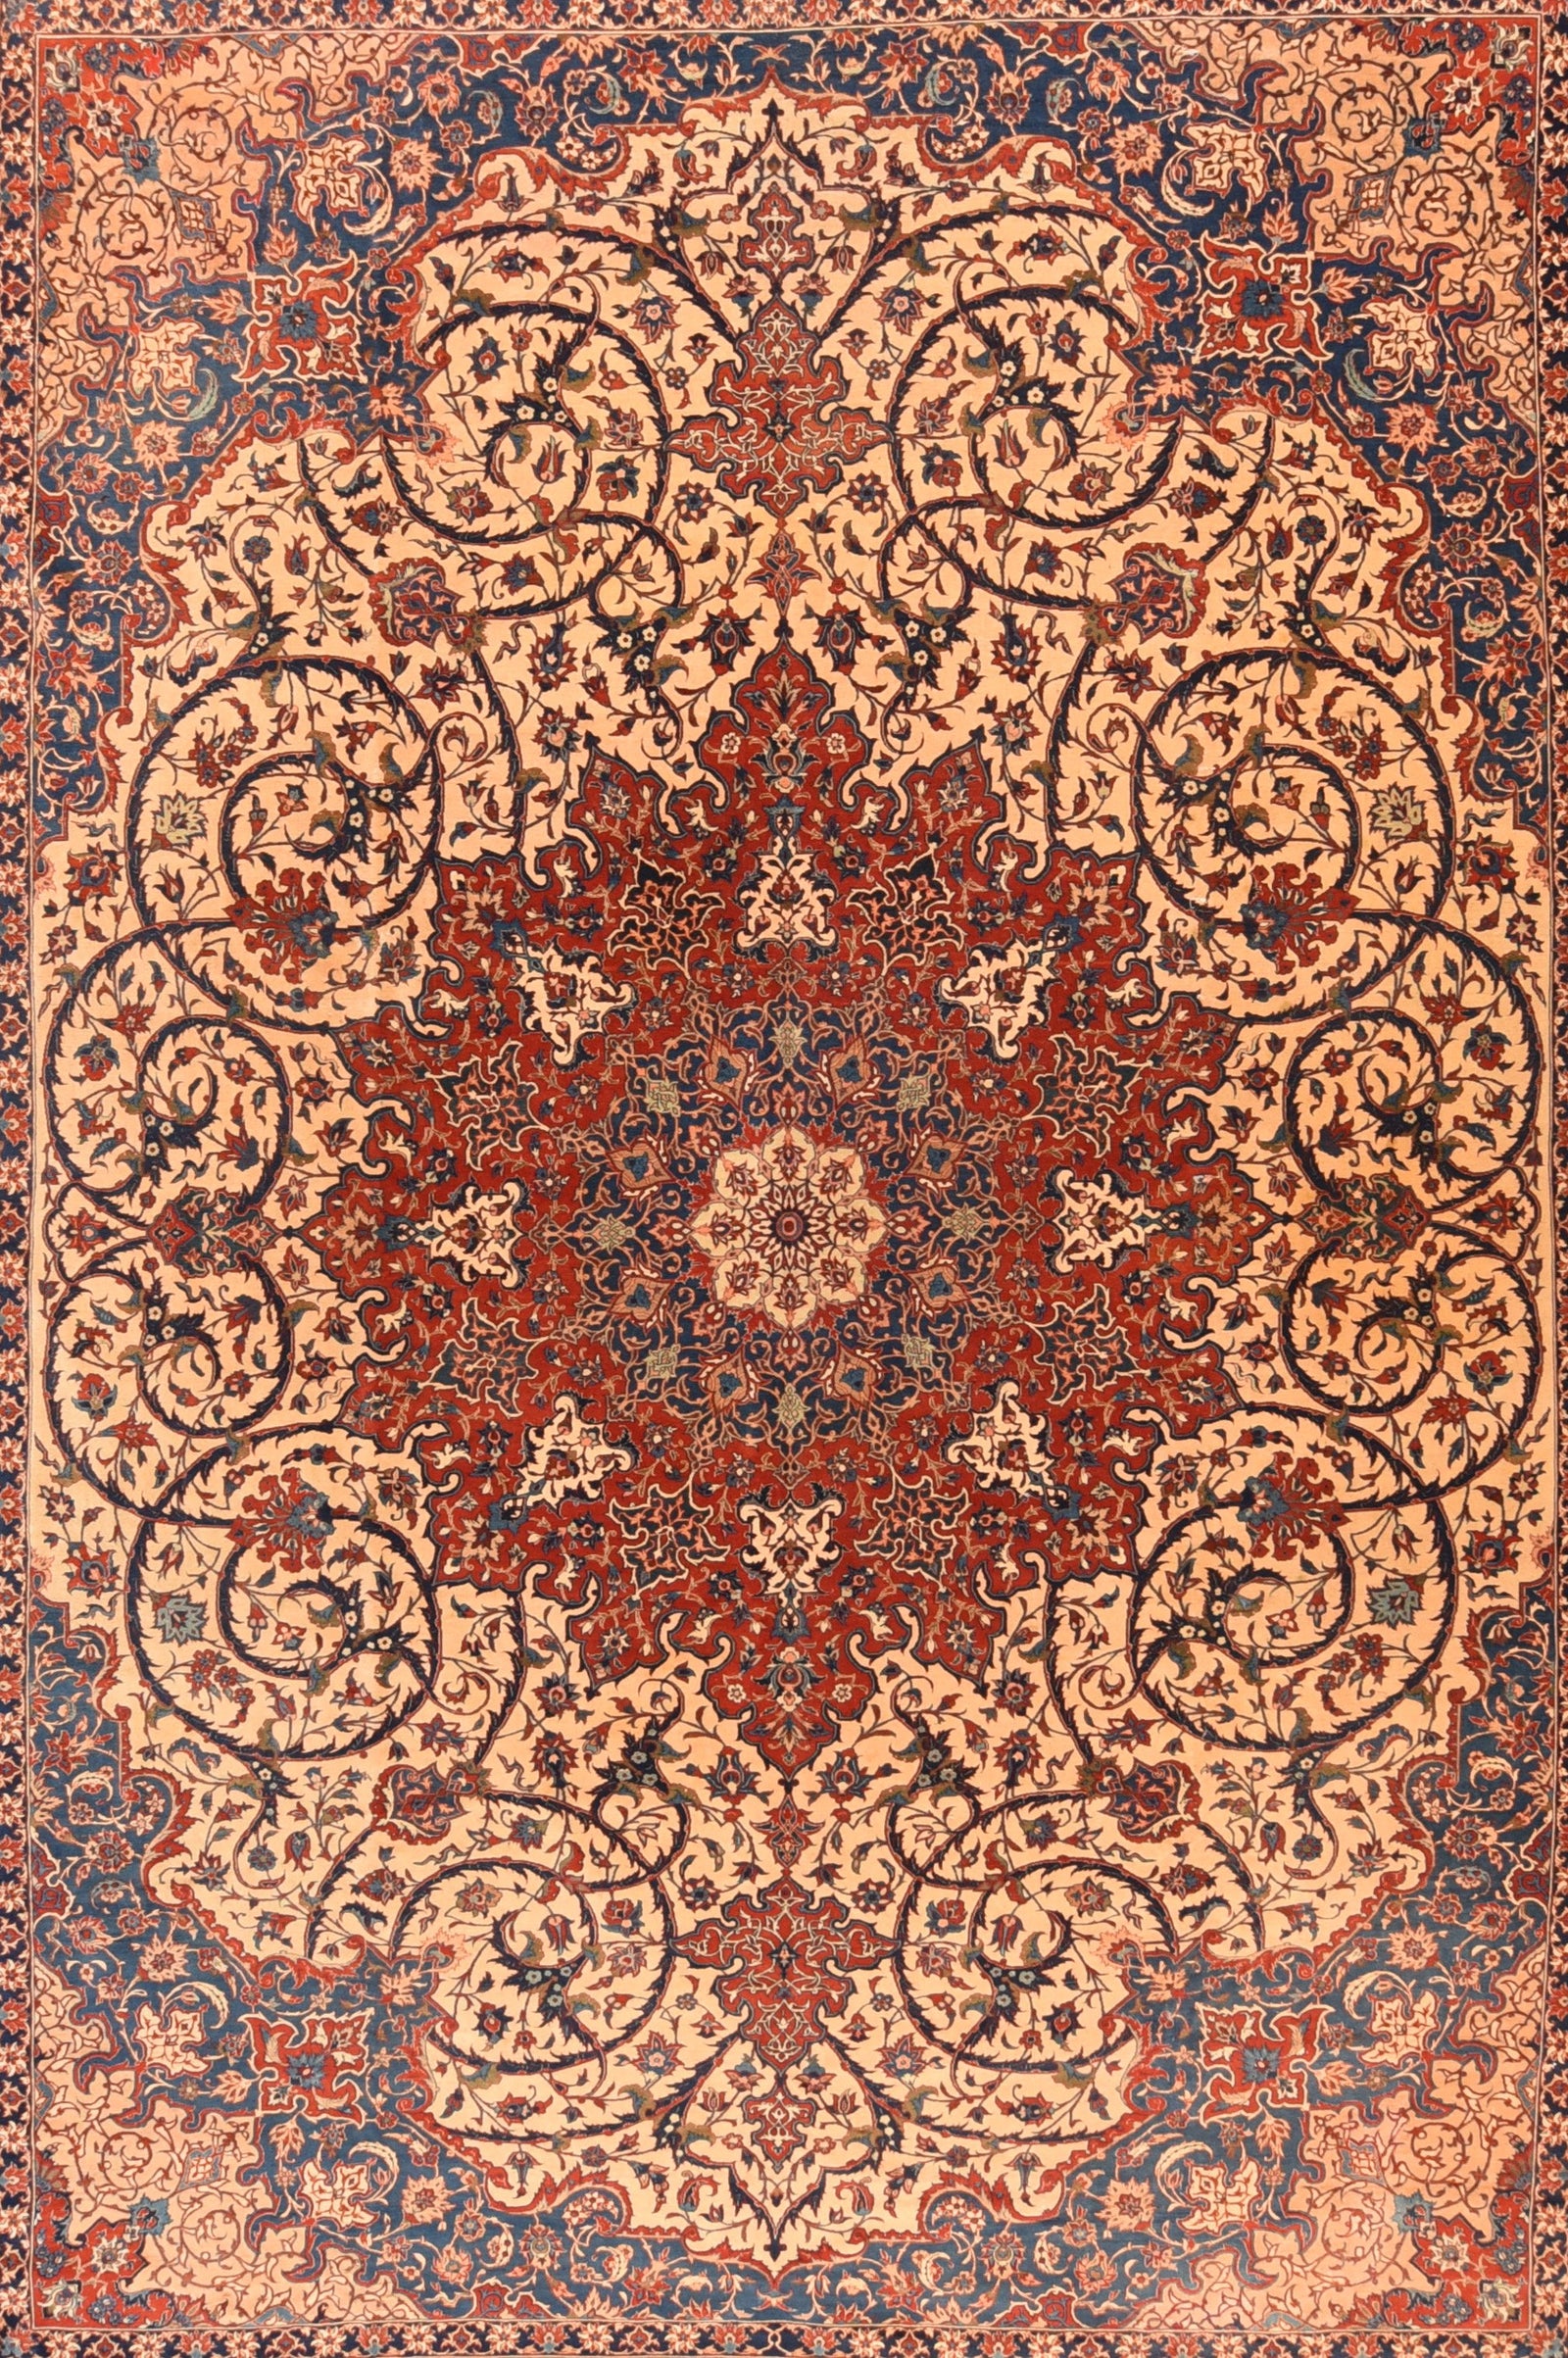 Antique Isfahan Area Rug